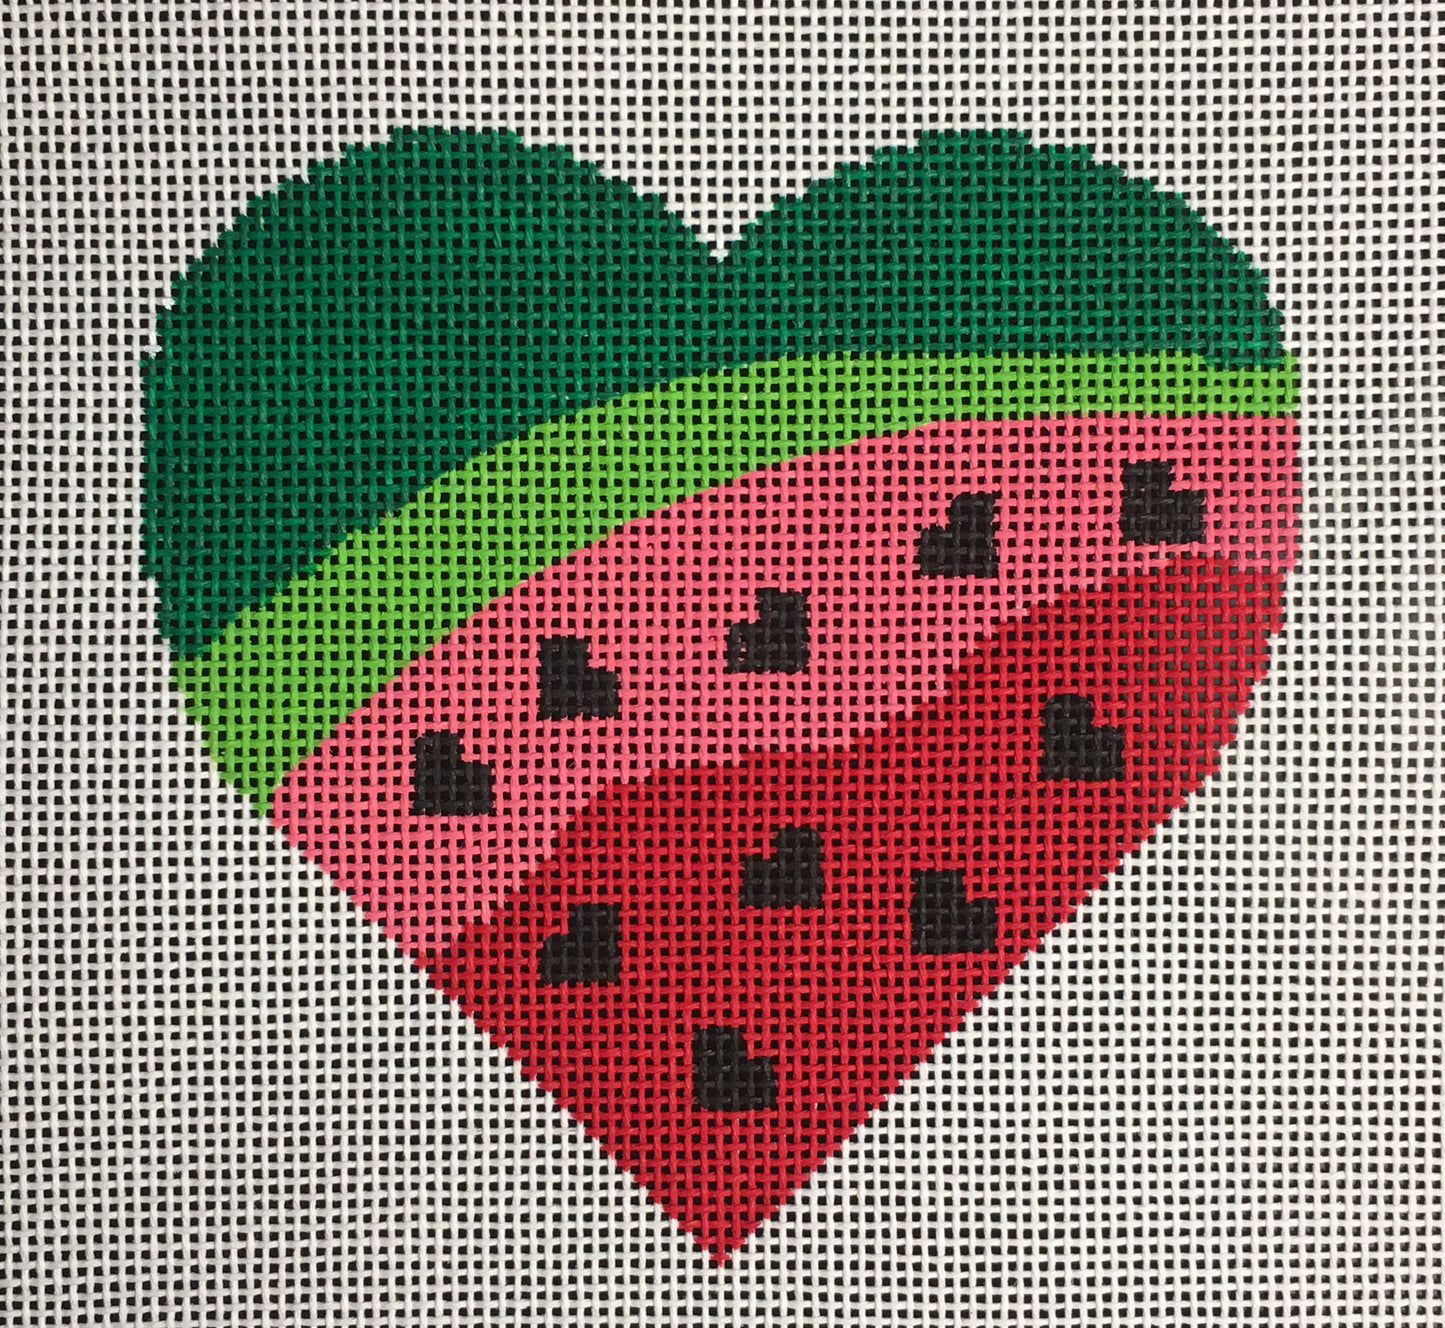 Vallerie Needlepoint Gallery heart shaped needlepoint canvas of a watermelon with heart-shaped seeds in fun whimsical and bright colors